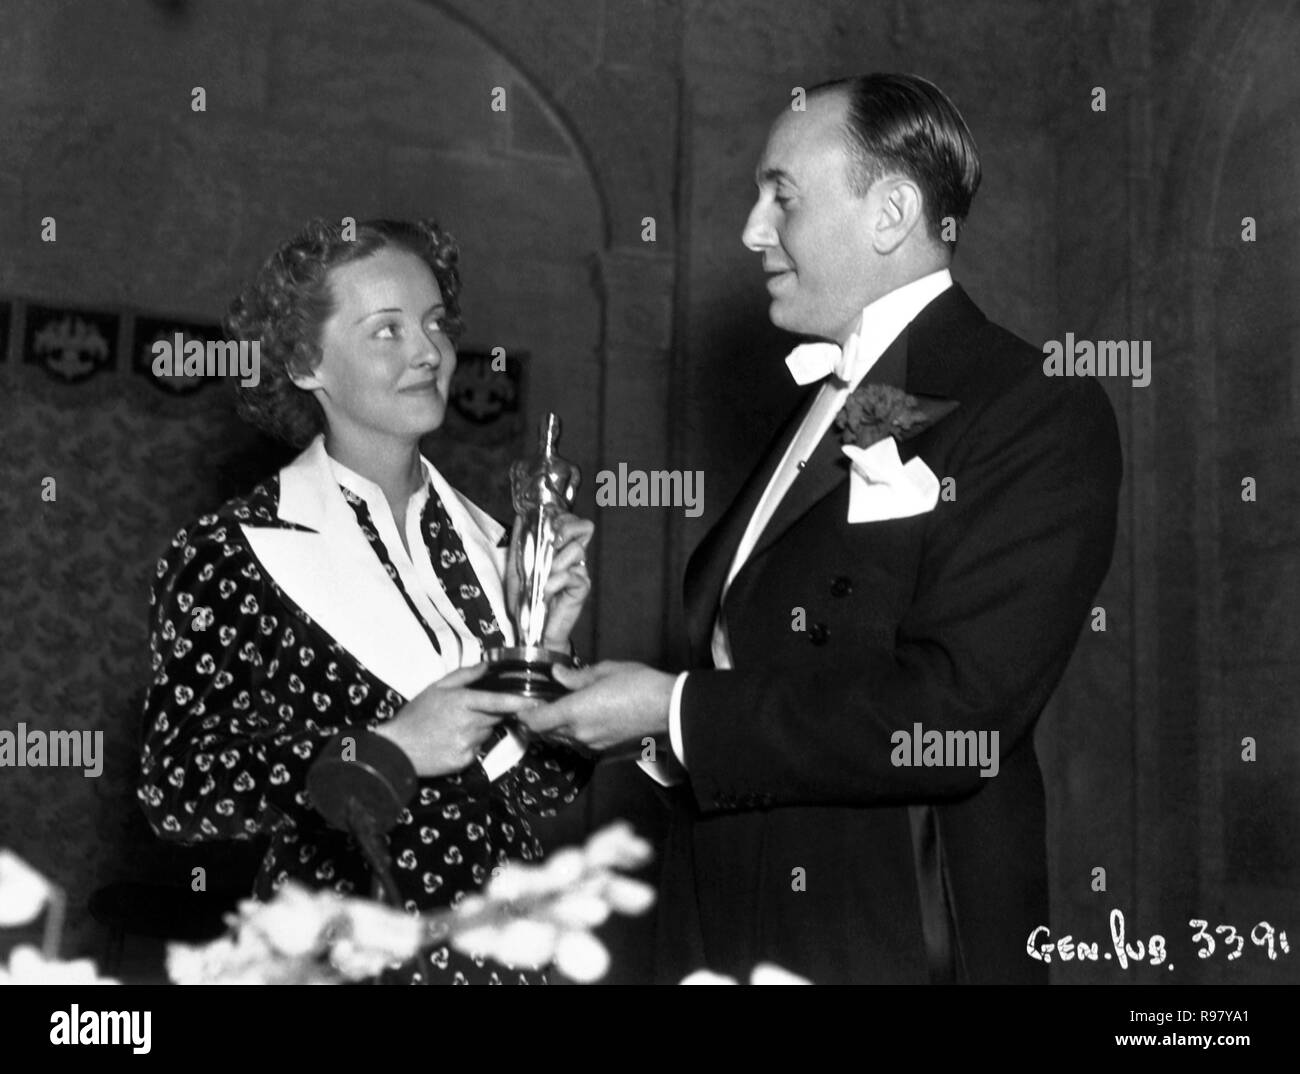 8th Academy Awards (1935). The producer Jack Warner with Bette Davis, winner of the best actress for 'Dangerous'.1936. Stock Photo